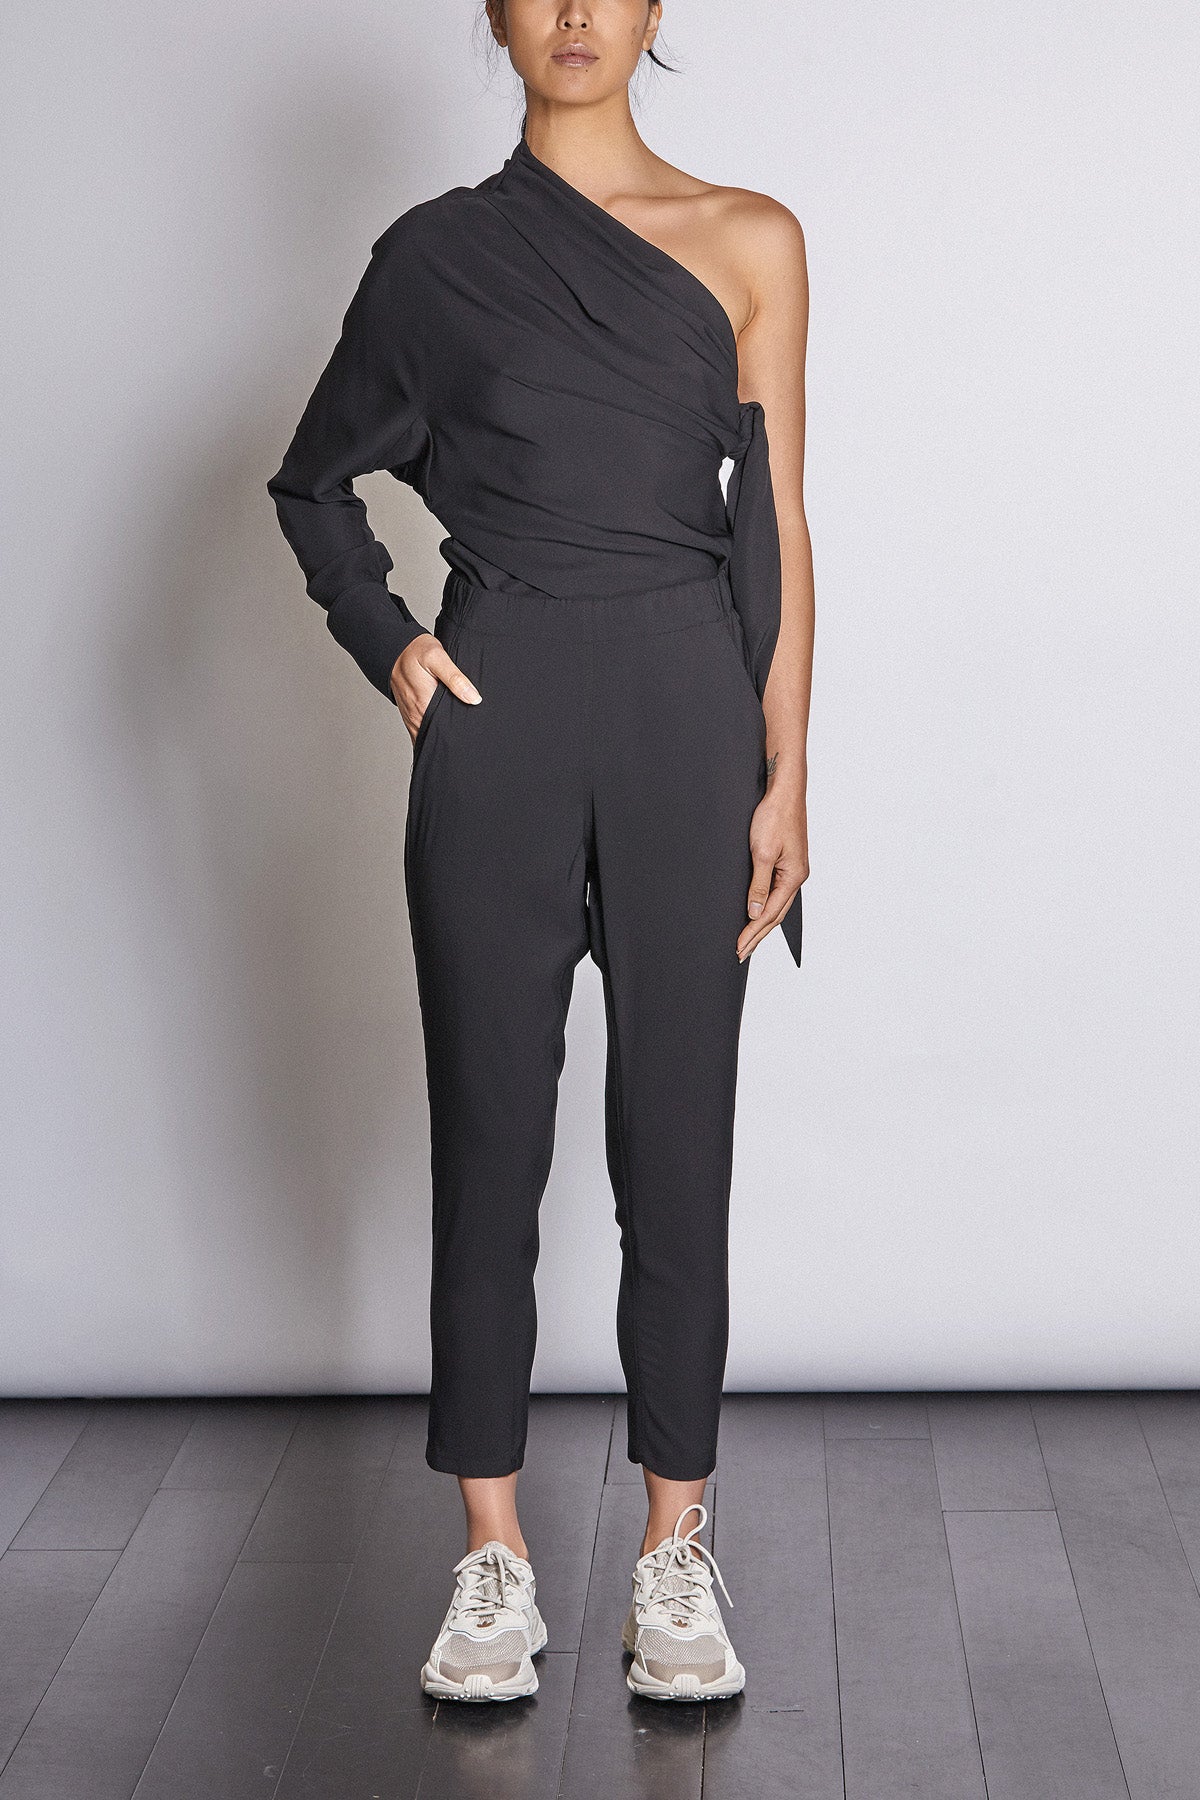 The Soft Harem Slouch Pant- Navy - MADE IN MELBOURNE - BEST SELLER - SALE